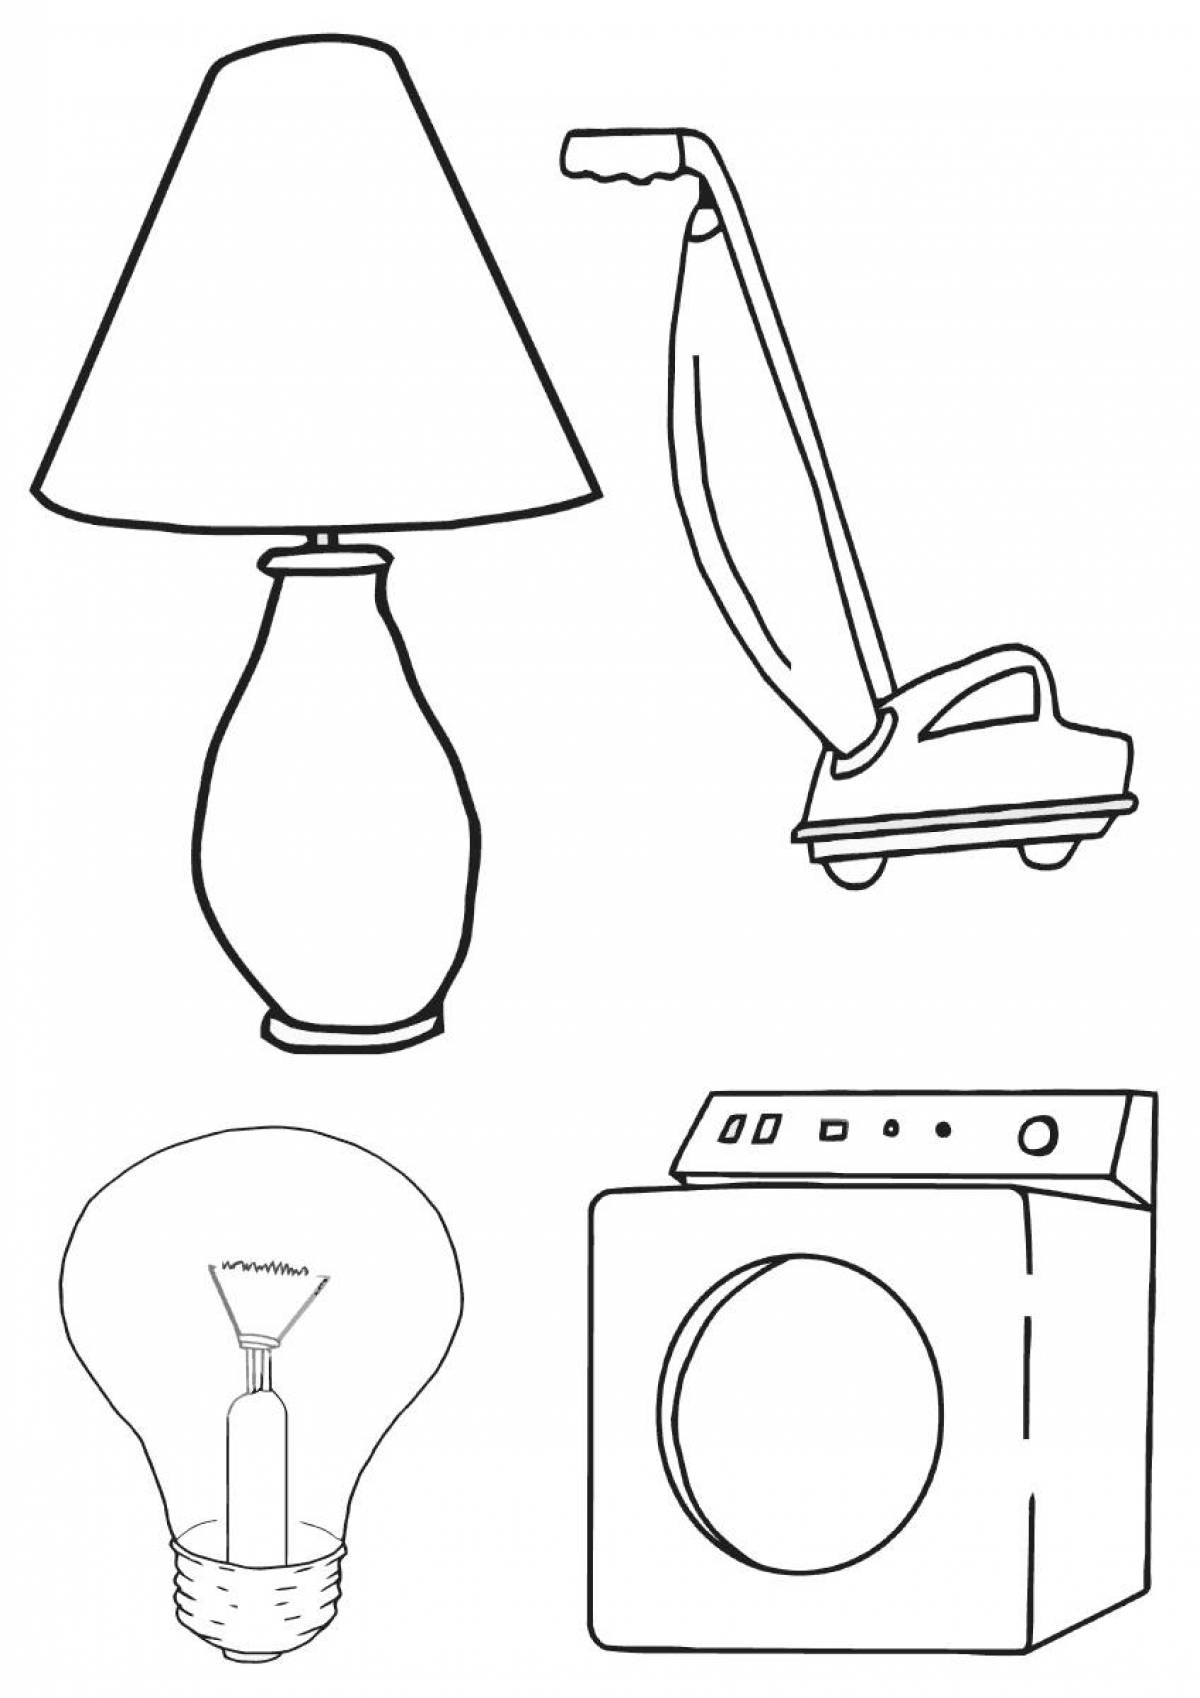 Coloring page incredible electrical appliances